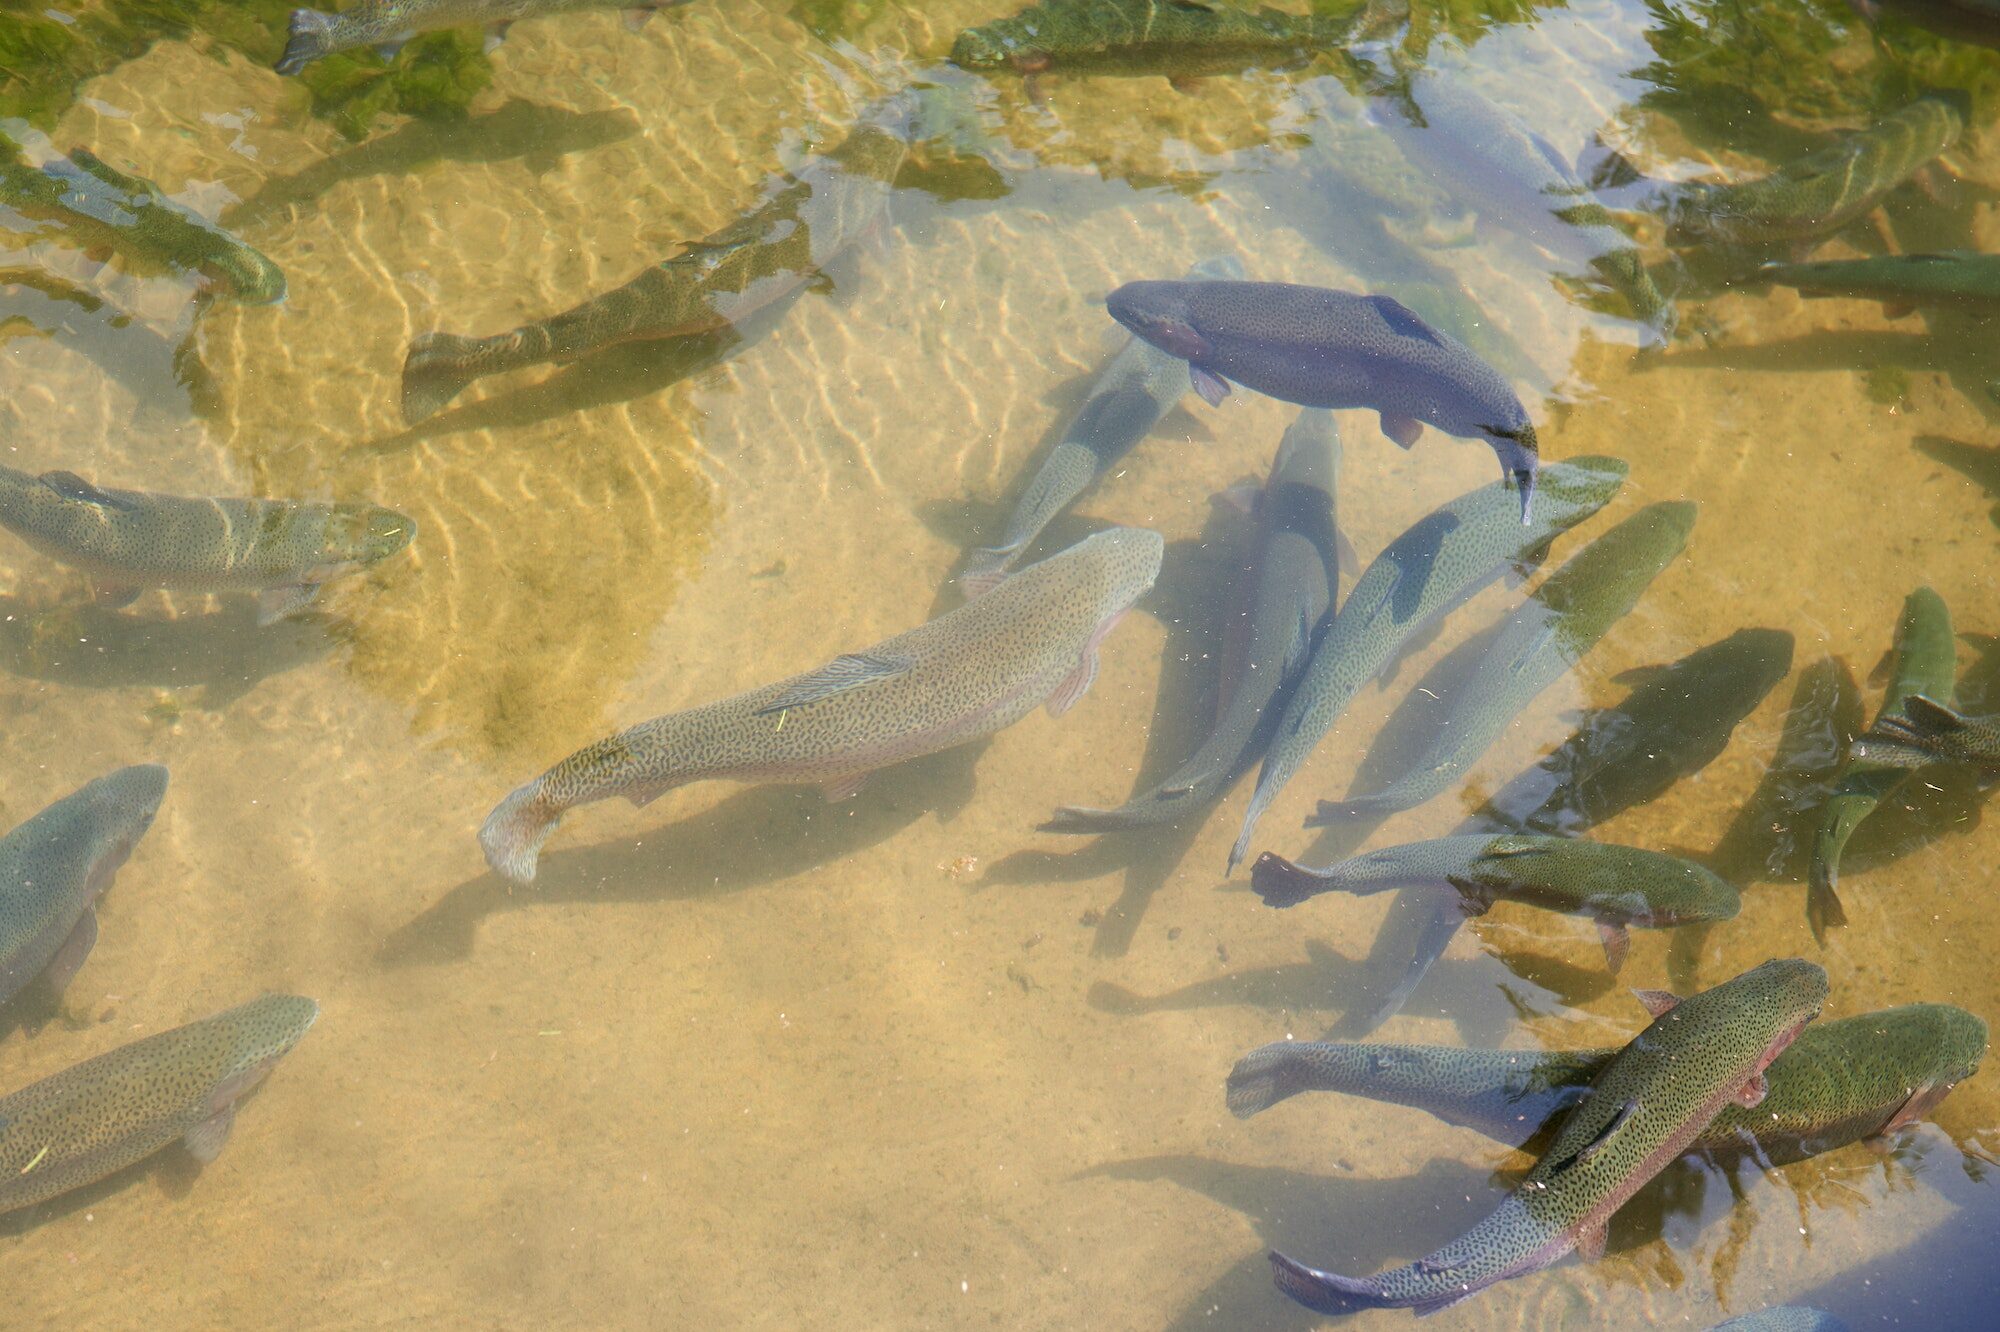 trout fish in an artificial pond in a farm. Breeding of trout for food industry.